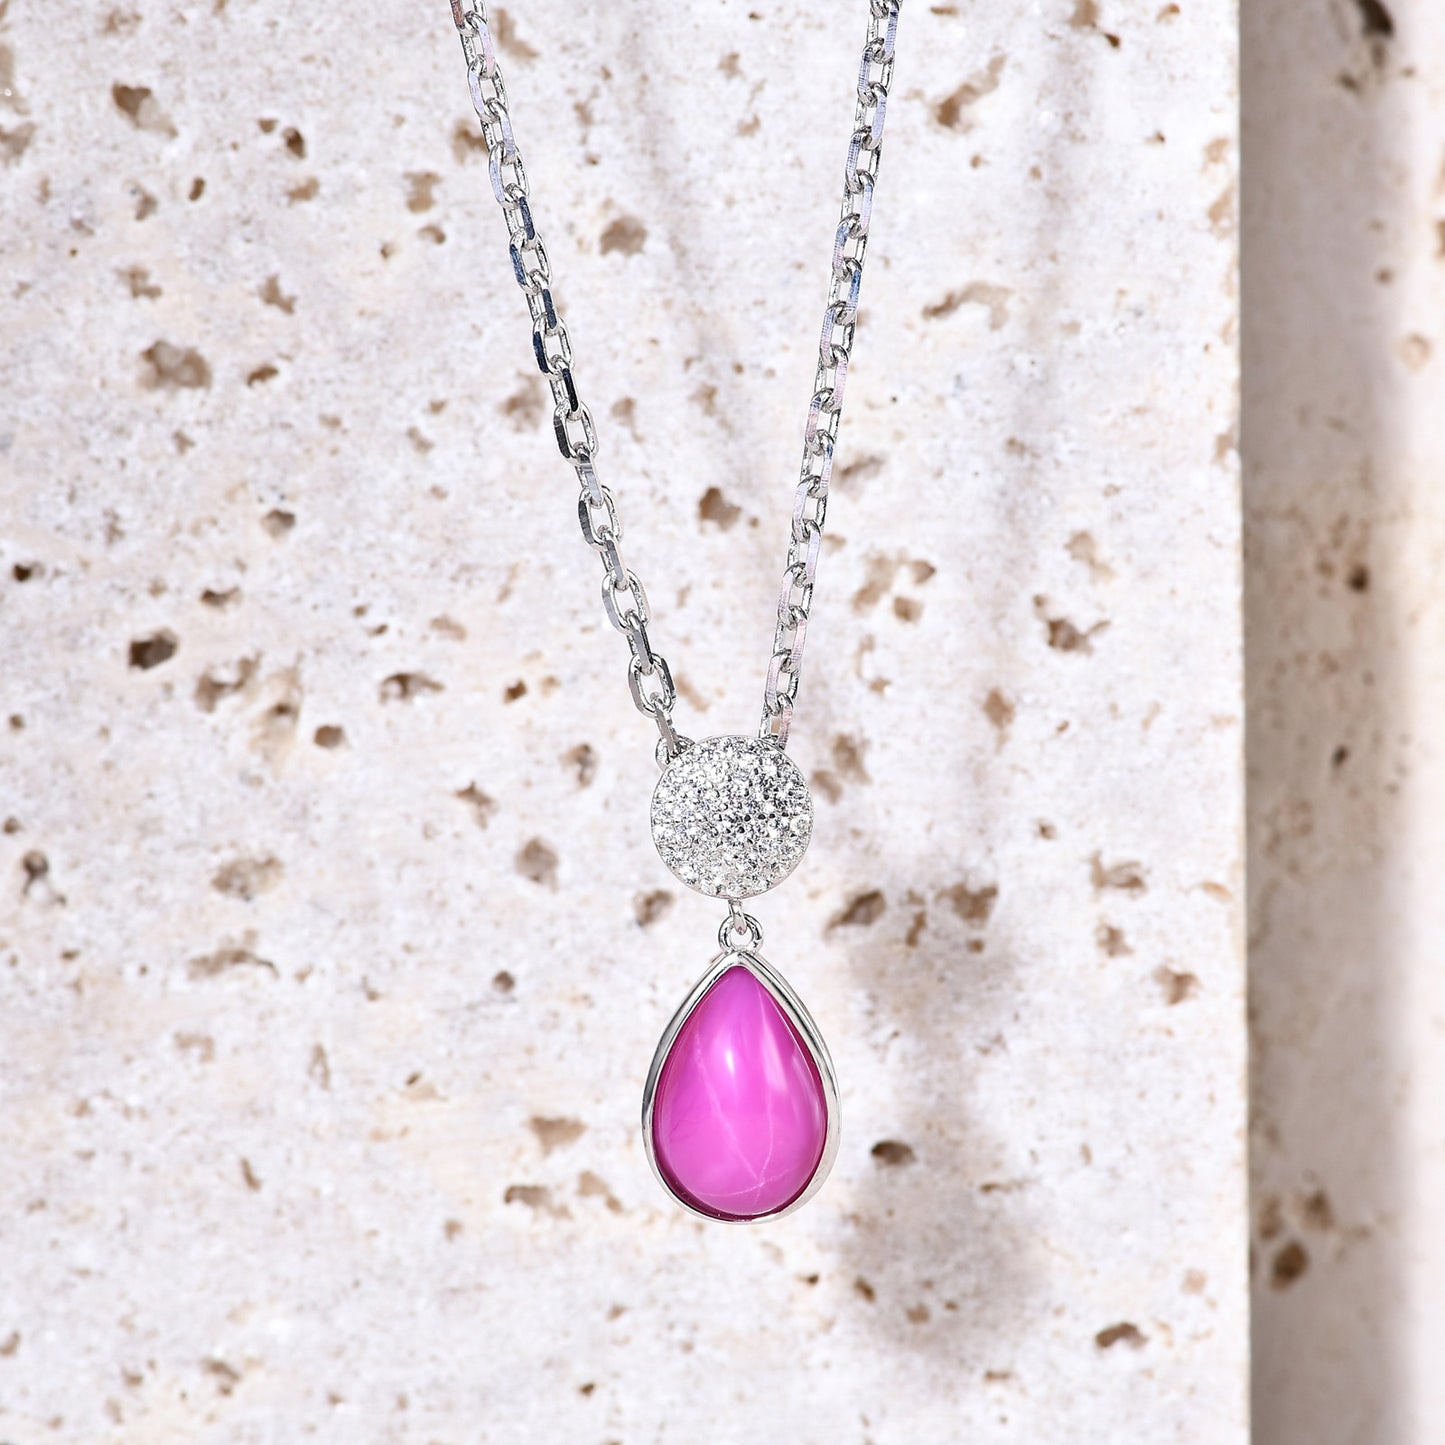 Luxury Design Six Starlight Synthetic Gemstone Pear Drop Pendant Silver Necklace for Women